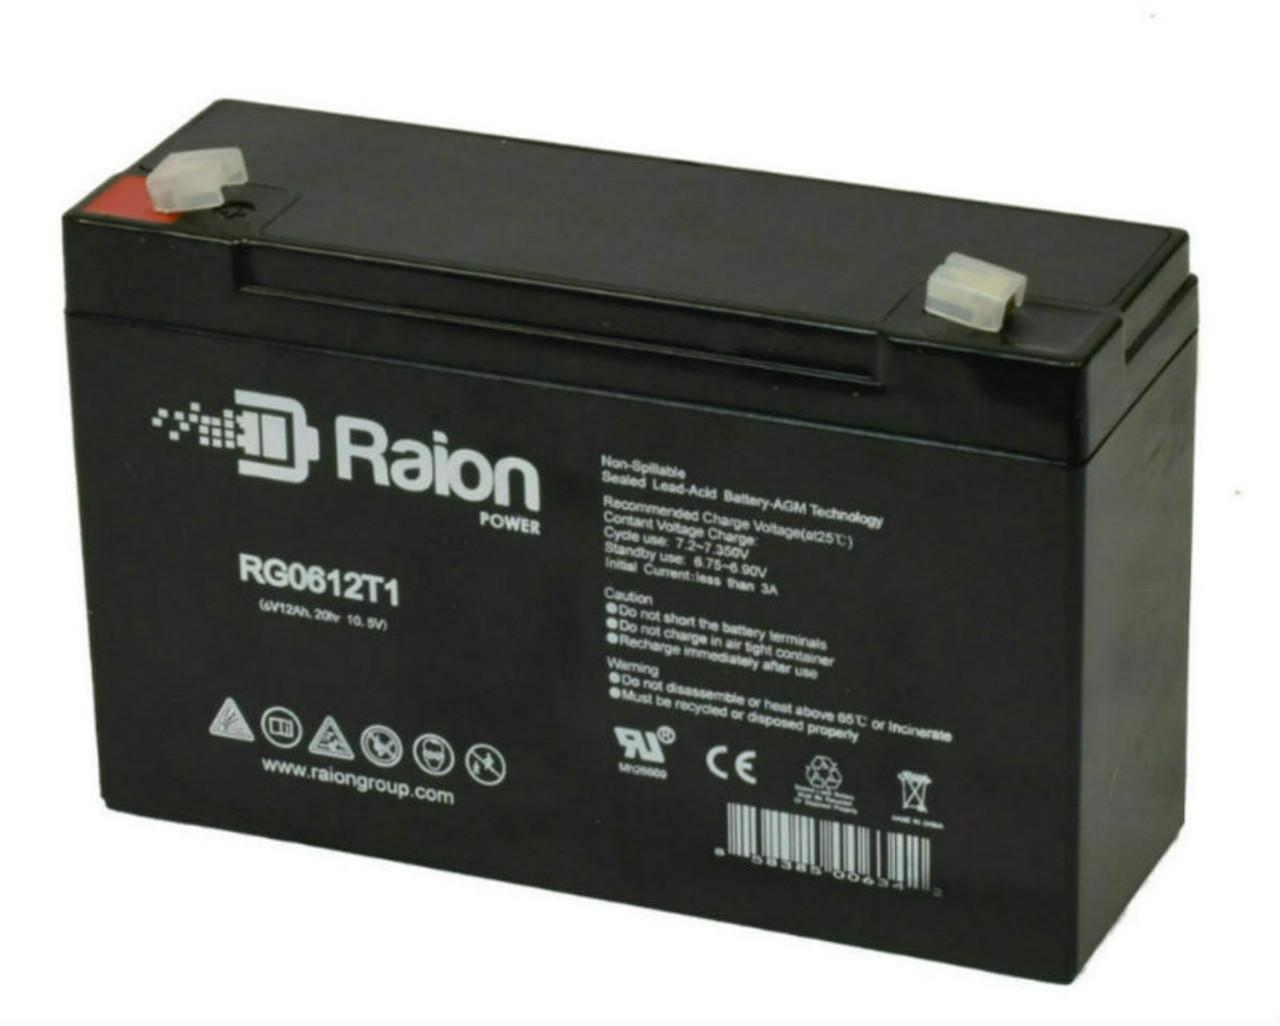 Raion Power RG06120T1 6V 12Ah Replacement UPS Battery Cartridge for MGE Pulsar ES 11+